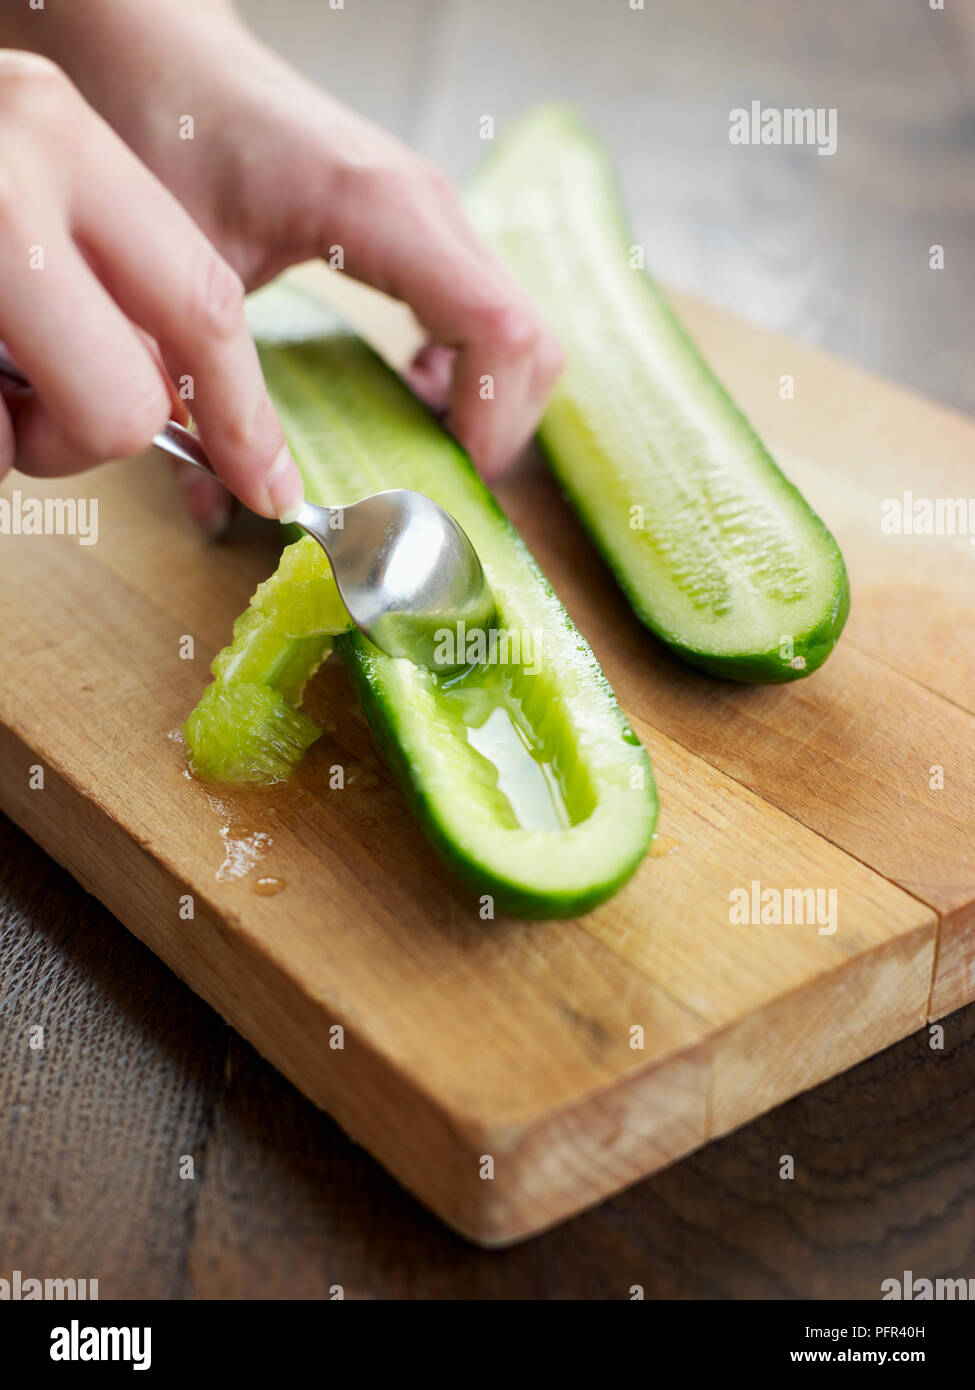 Cucumbers cut in half lengthways and having seeds removed with spoon Stock Photo